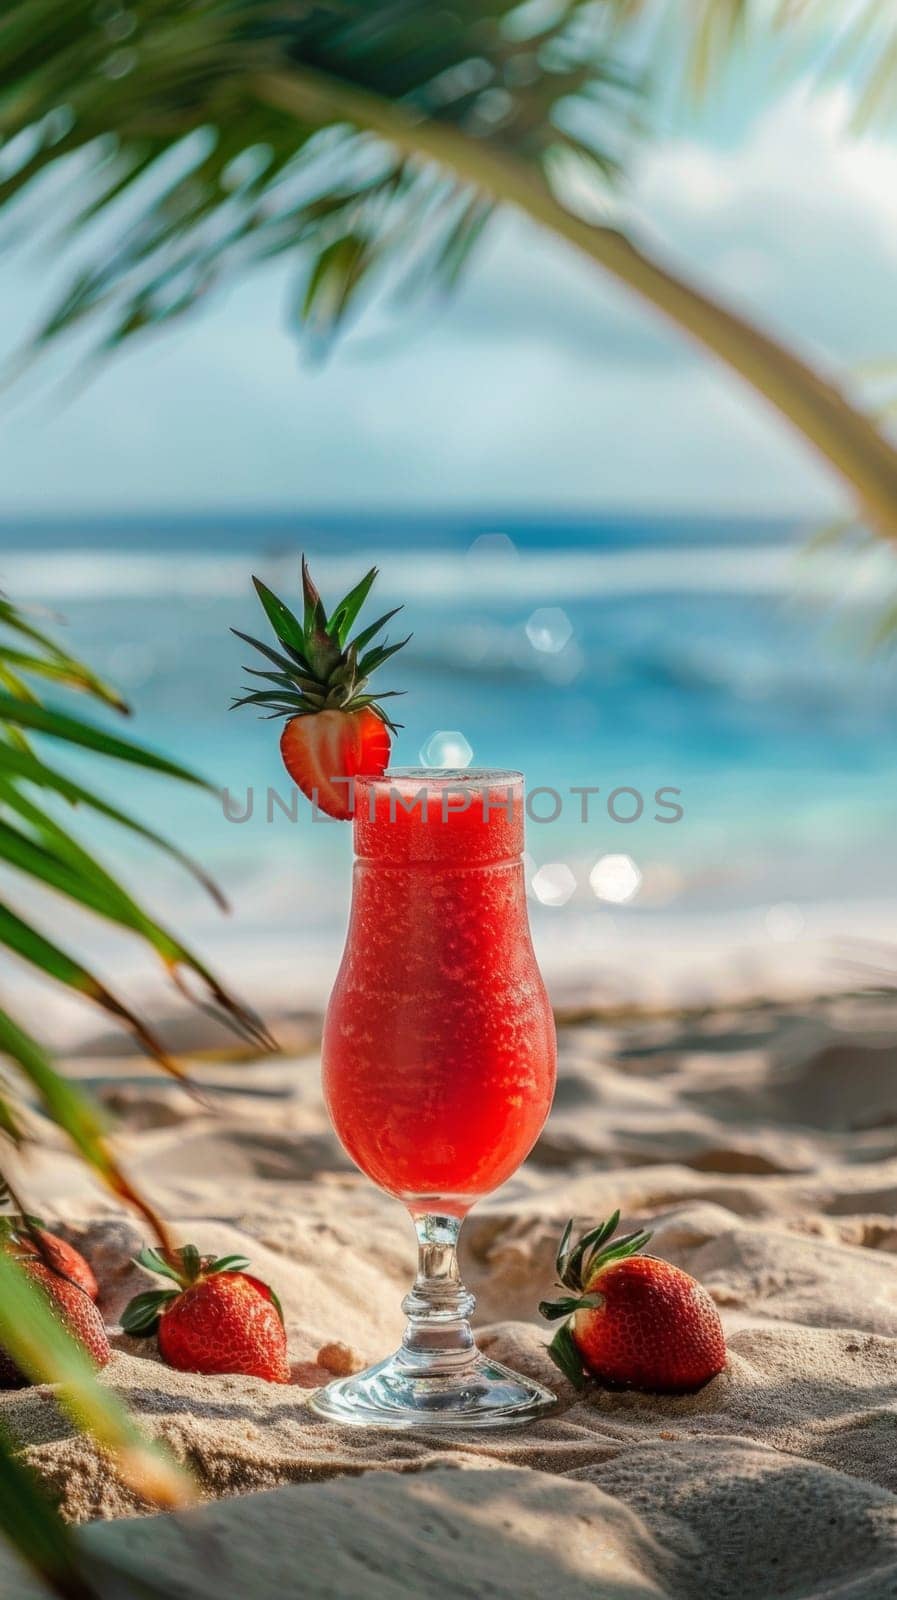 A glass of a drink sitting on the beach with strawberries, AI by starush